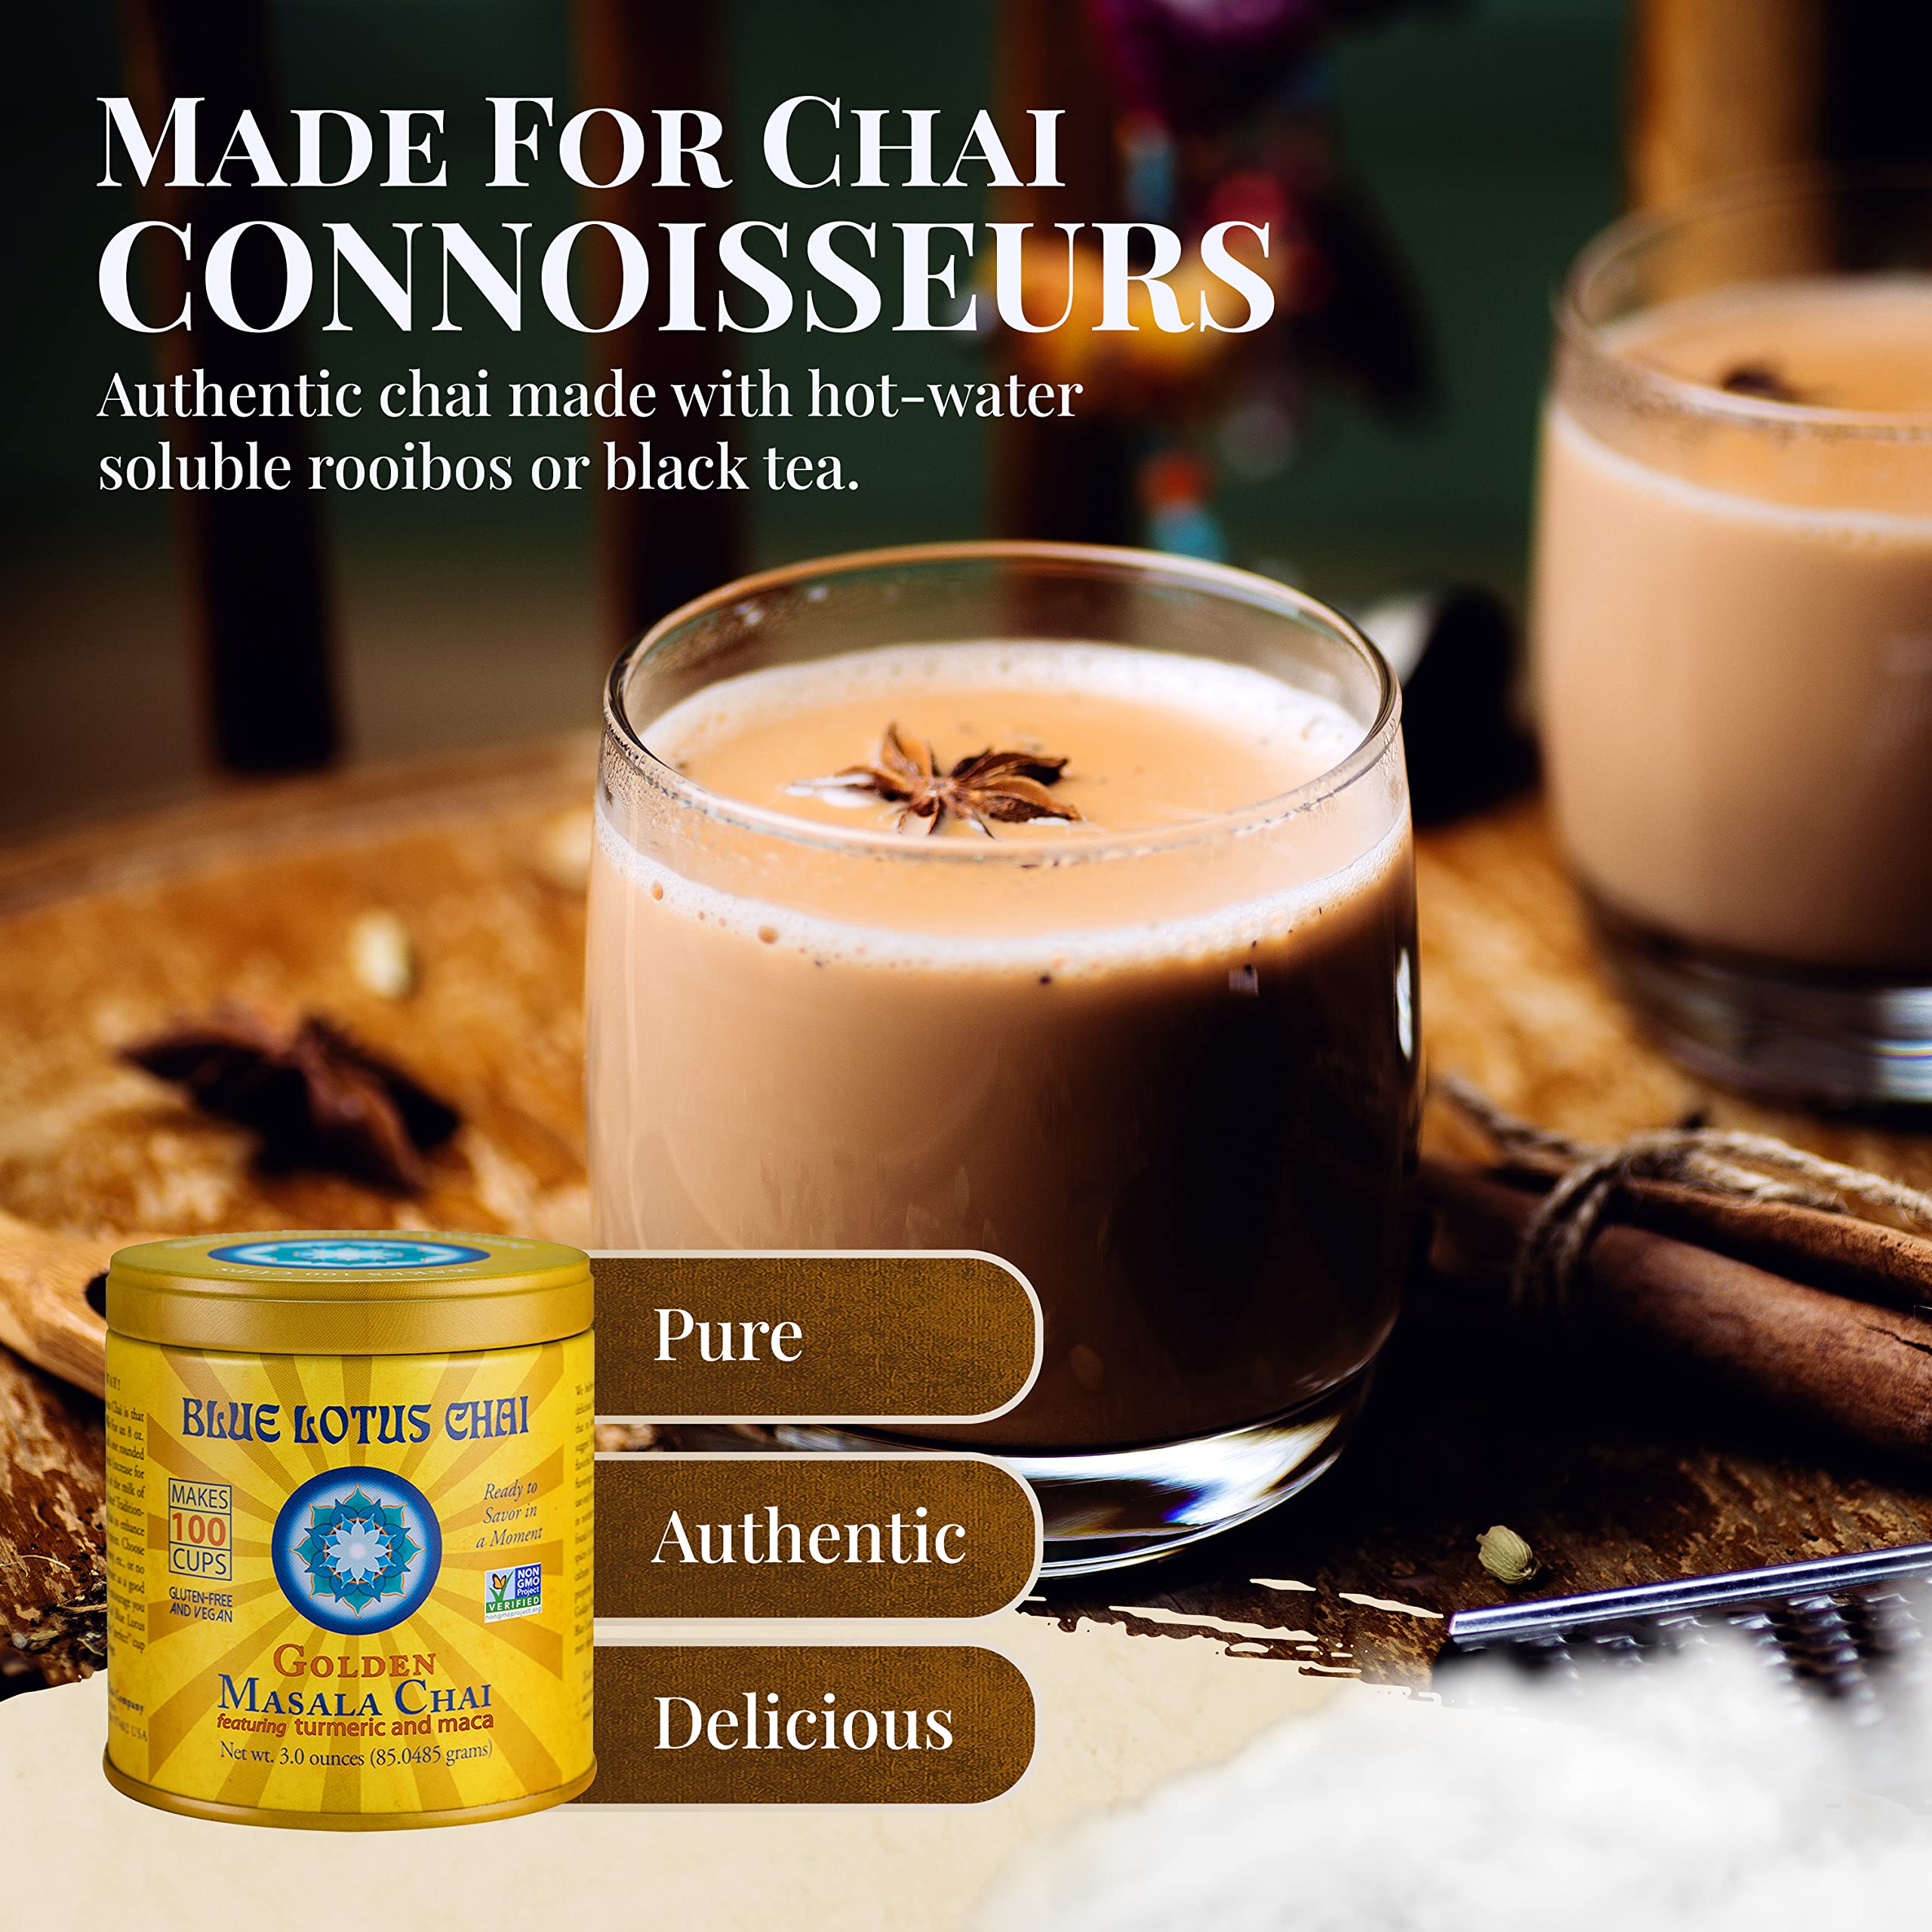 Blue Lotus Chai - Golden Masala Flavor Chai - Makes 100 Cups - 3 Ounce Masala Spiced Chai Powder with Organic Spices - Instant Indian Tea No Steeping - No Gluten